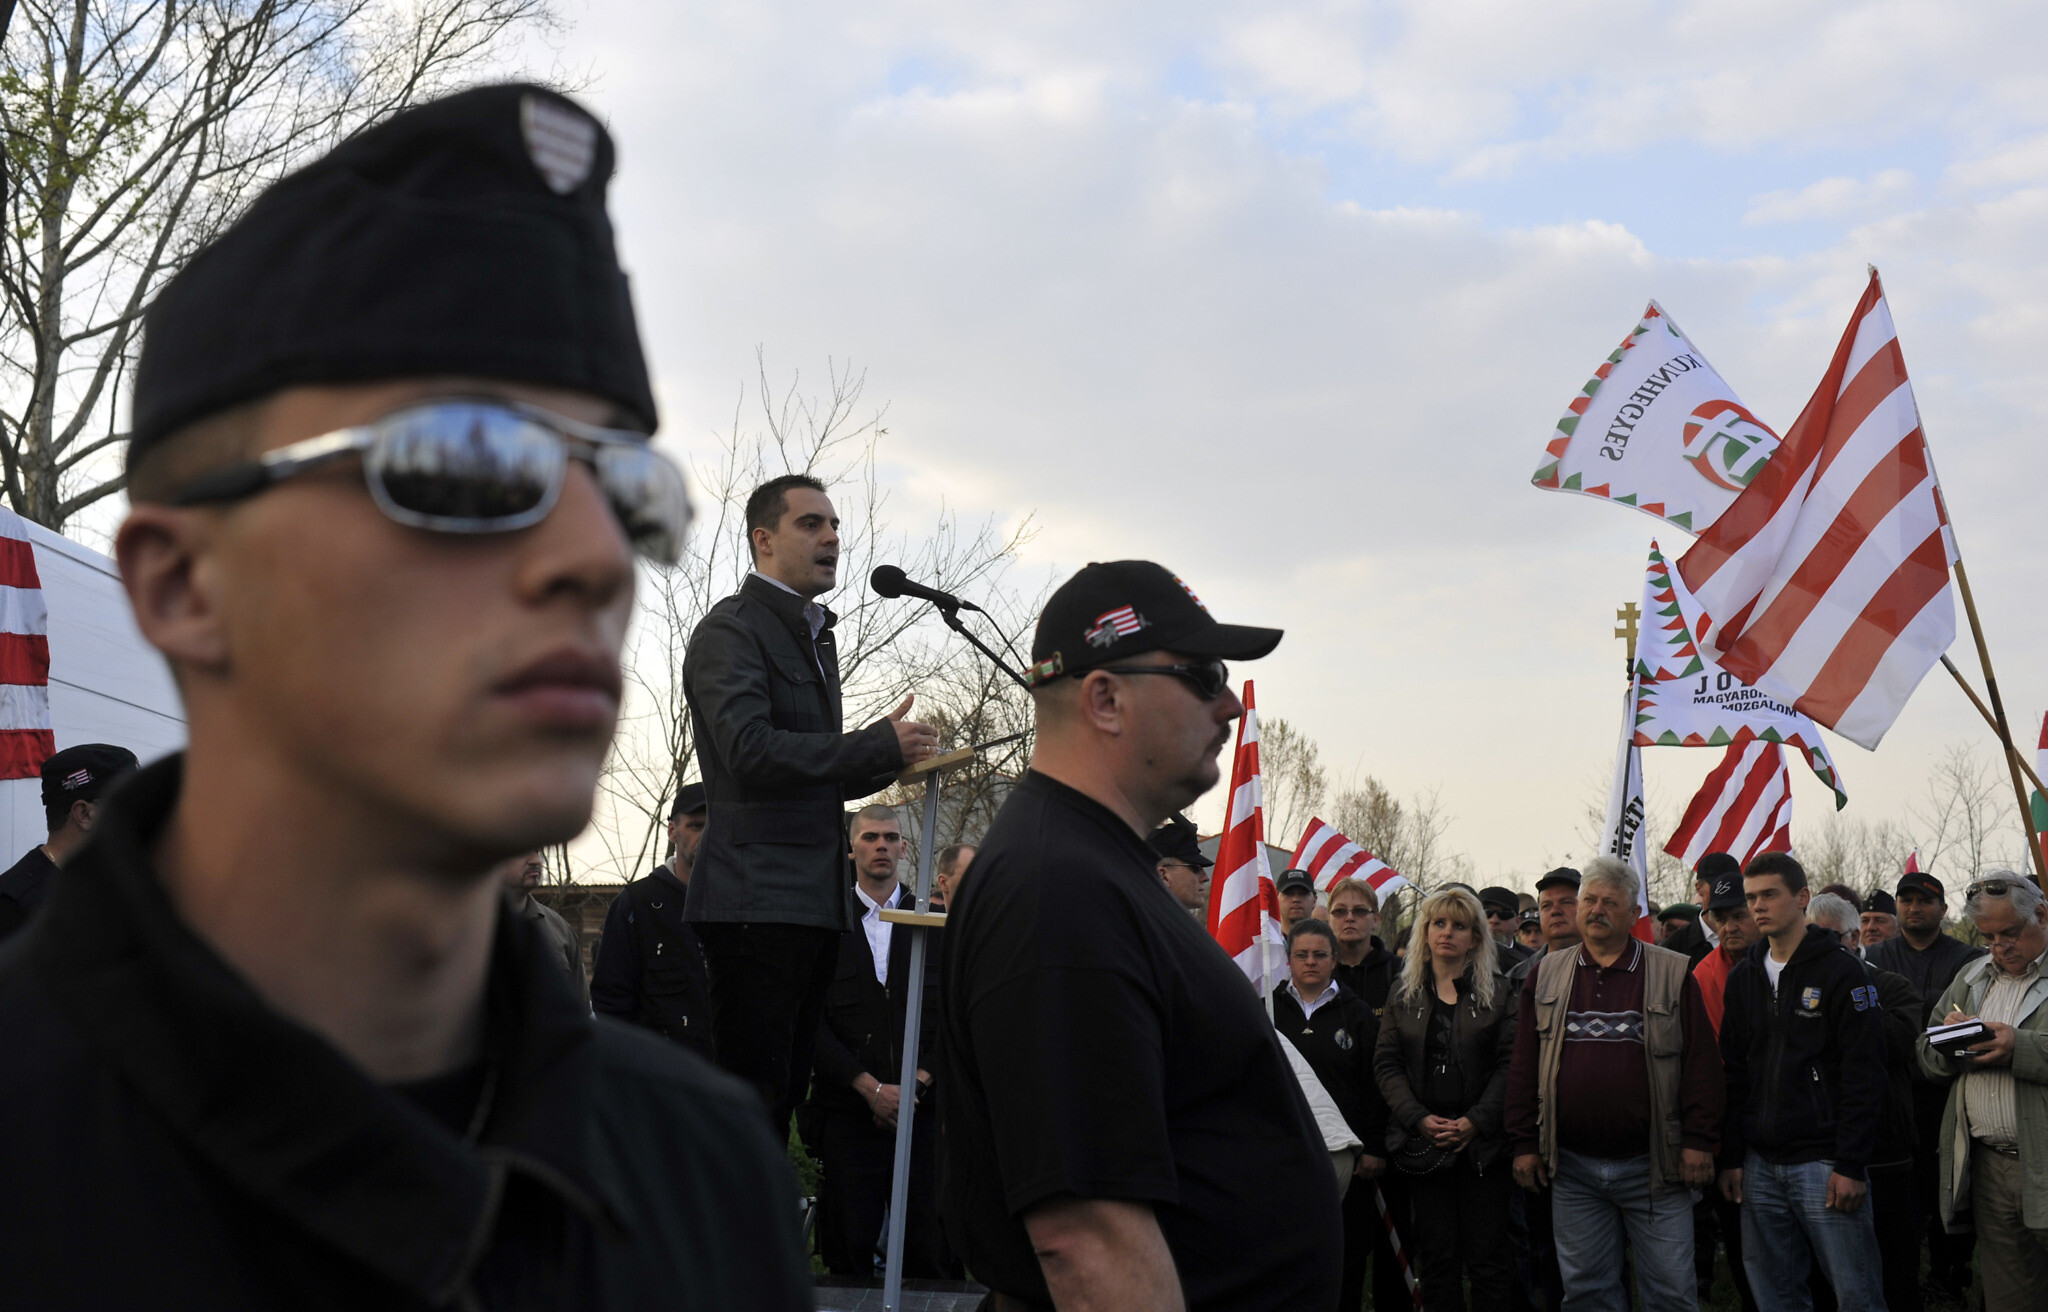 Members of a controversial extreme-right vigilante group stand guard while Gabor Vona, then-leader of the extreme-right Jobbik party, talks during a demonstration in the town of Hajduhadhaz, eastern Hungary, April 17, 2011. Vigilante groups and paramilitary organizations entered the town two weeks prior, conducting foot and car patrols to spread fear in the local Gypsy population. (AP Photo/Bela Szandelszky)